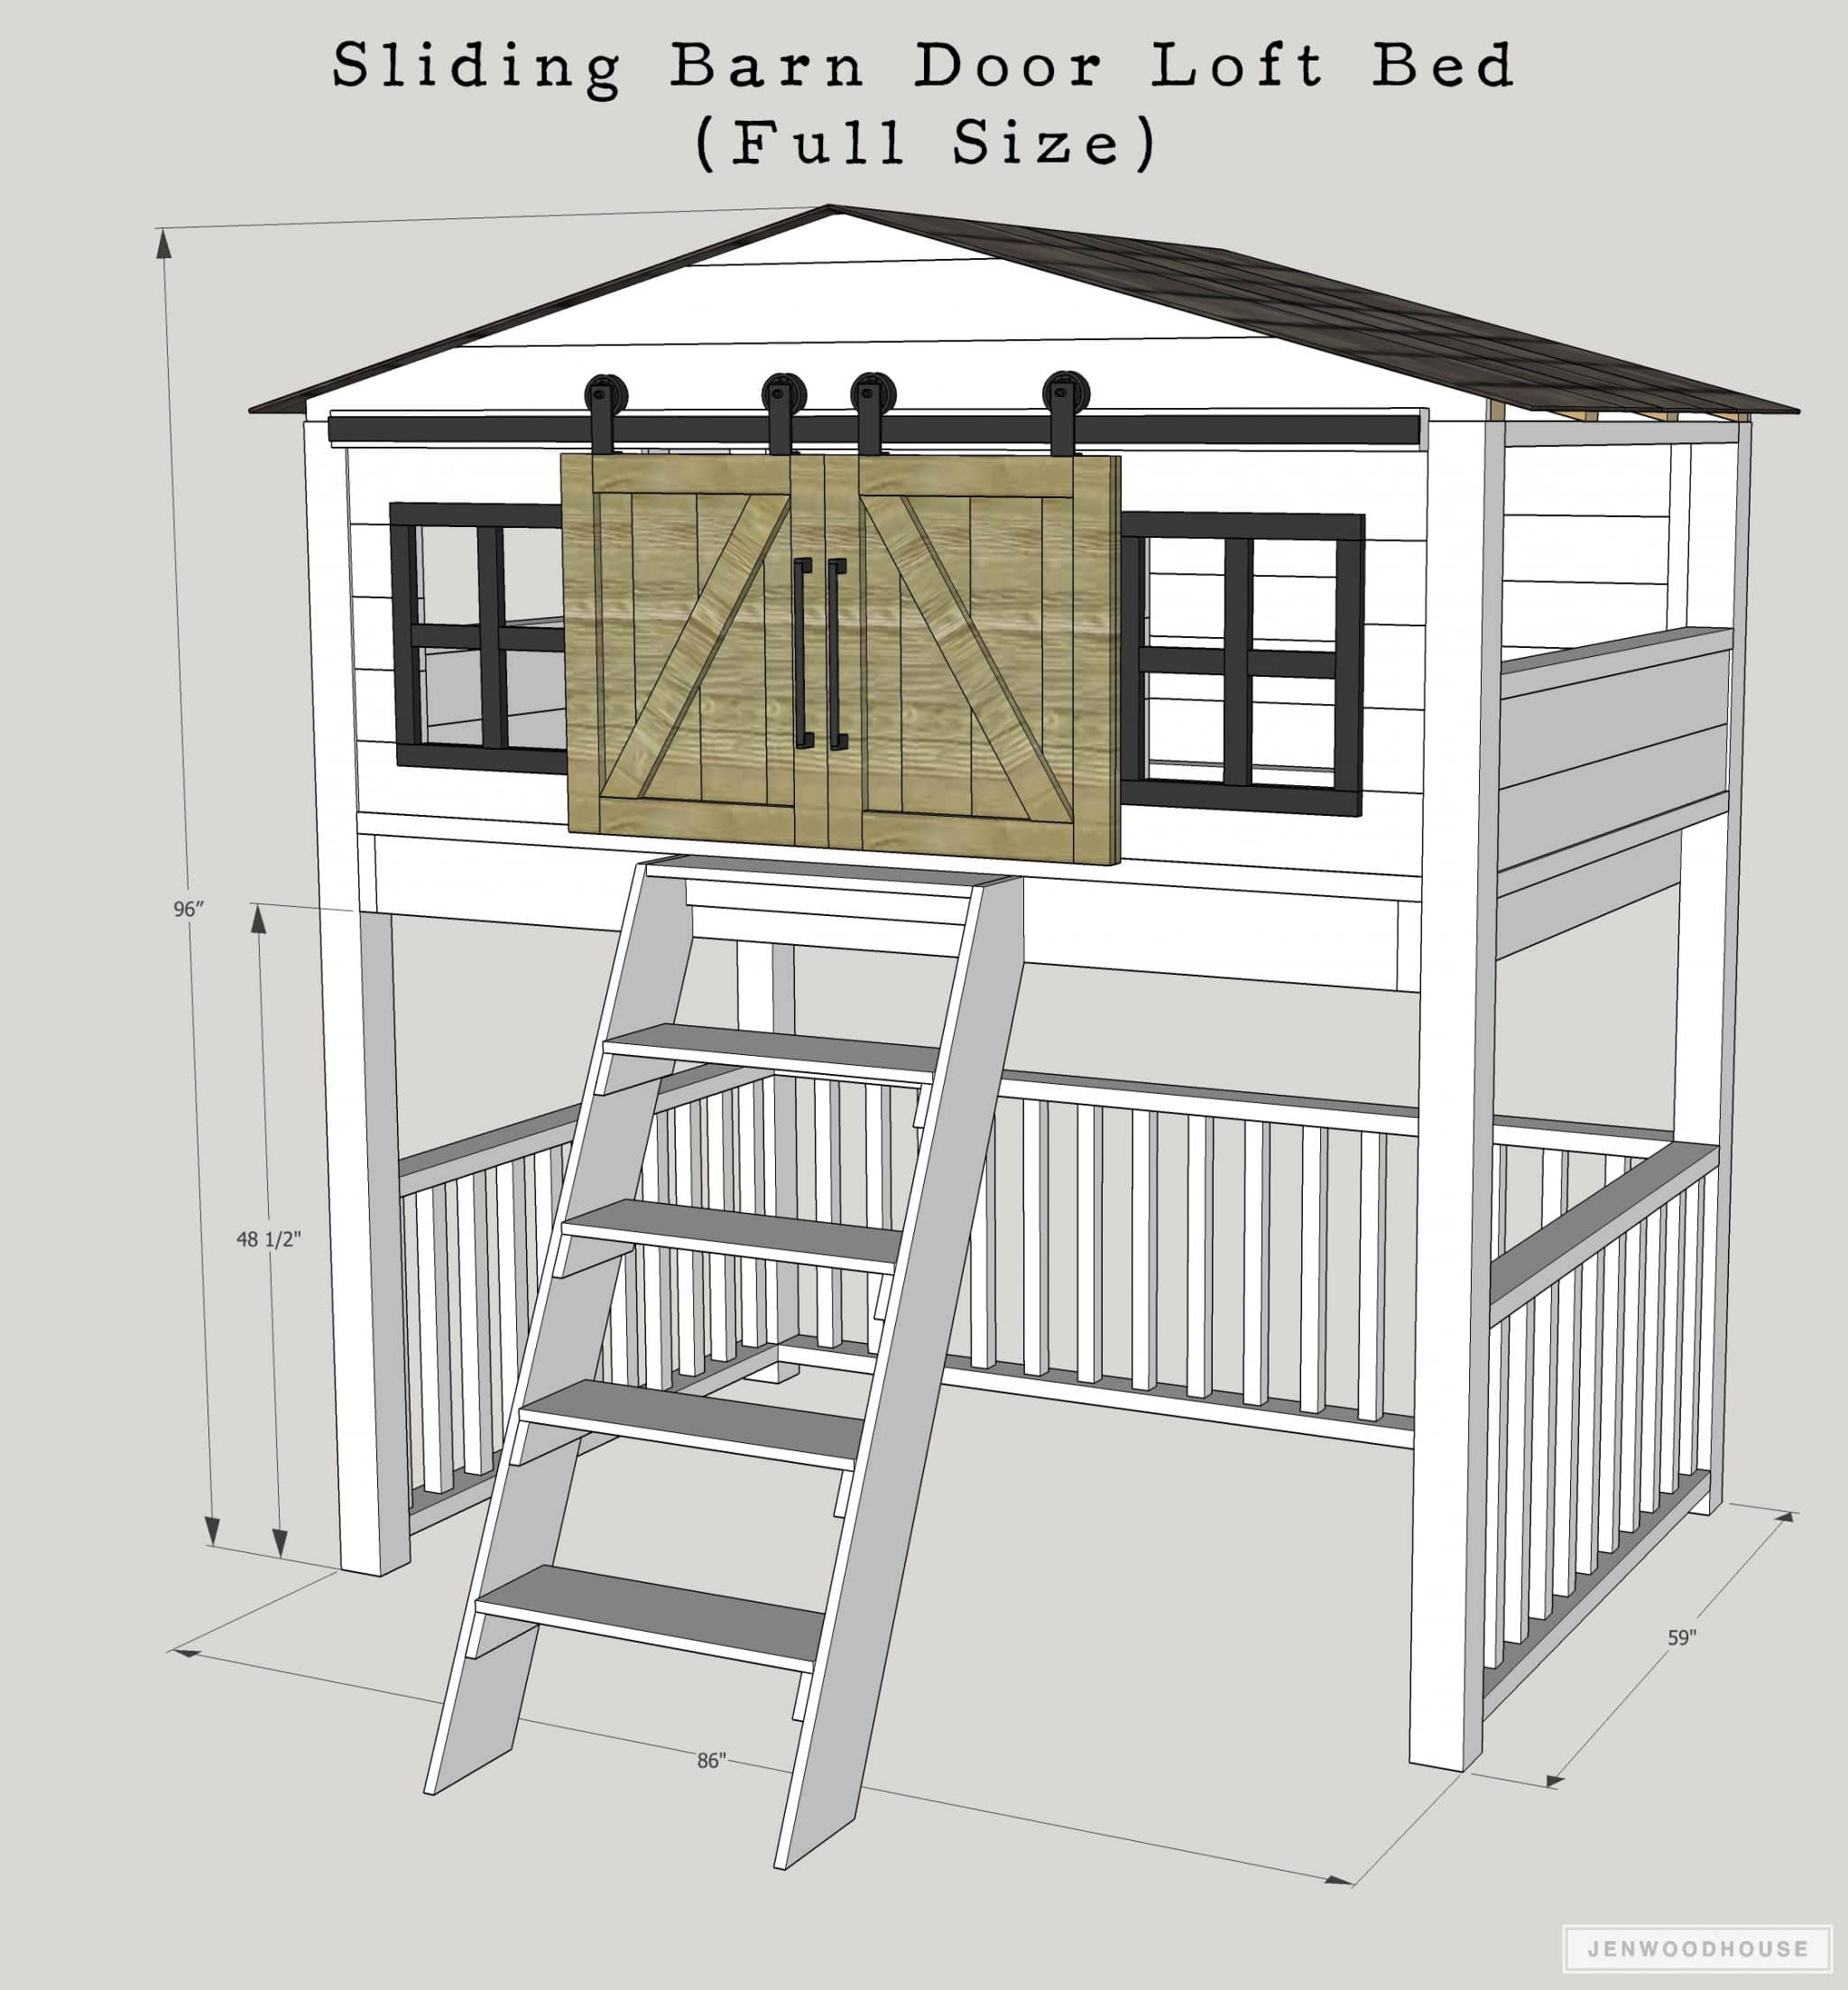 Build A Diy Sliding Barn Door Loft Bed, How To Build A Full Size Bunk Bed